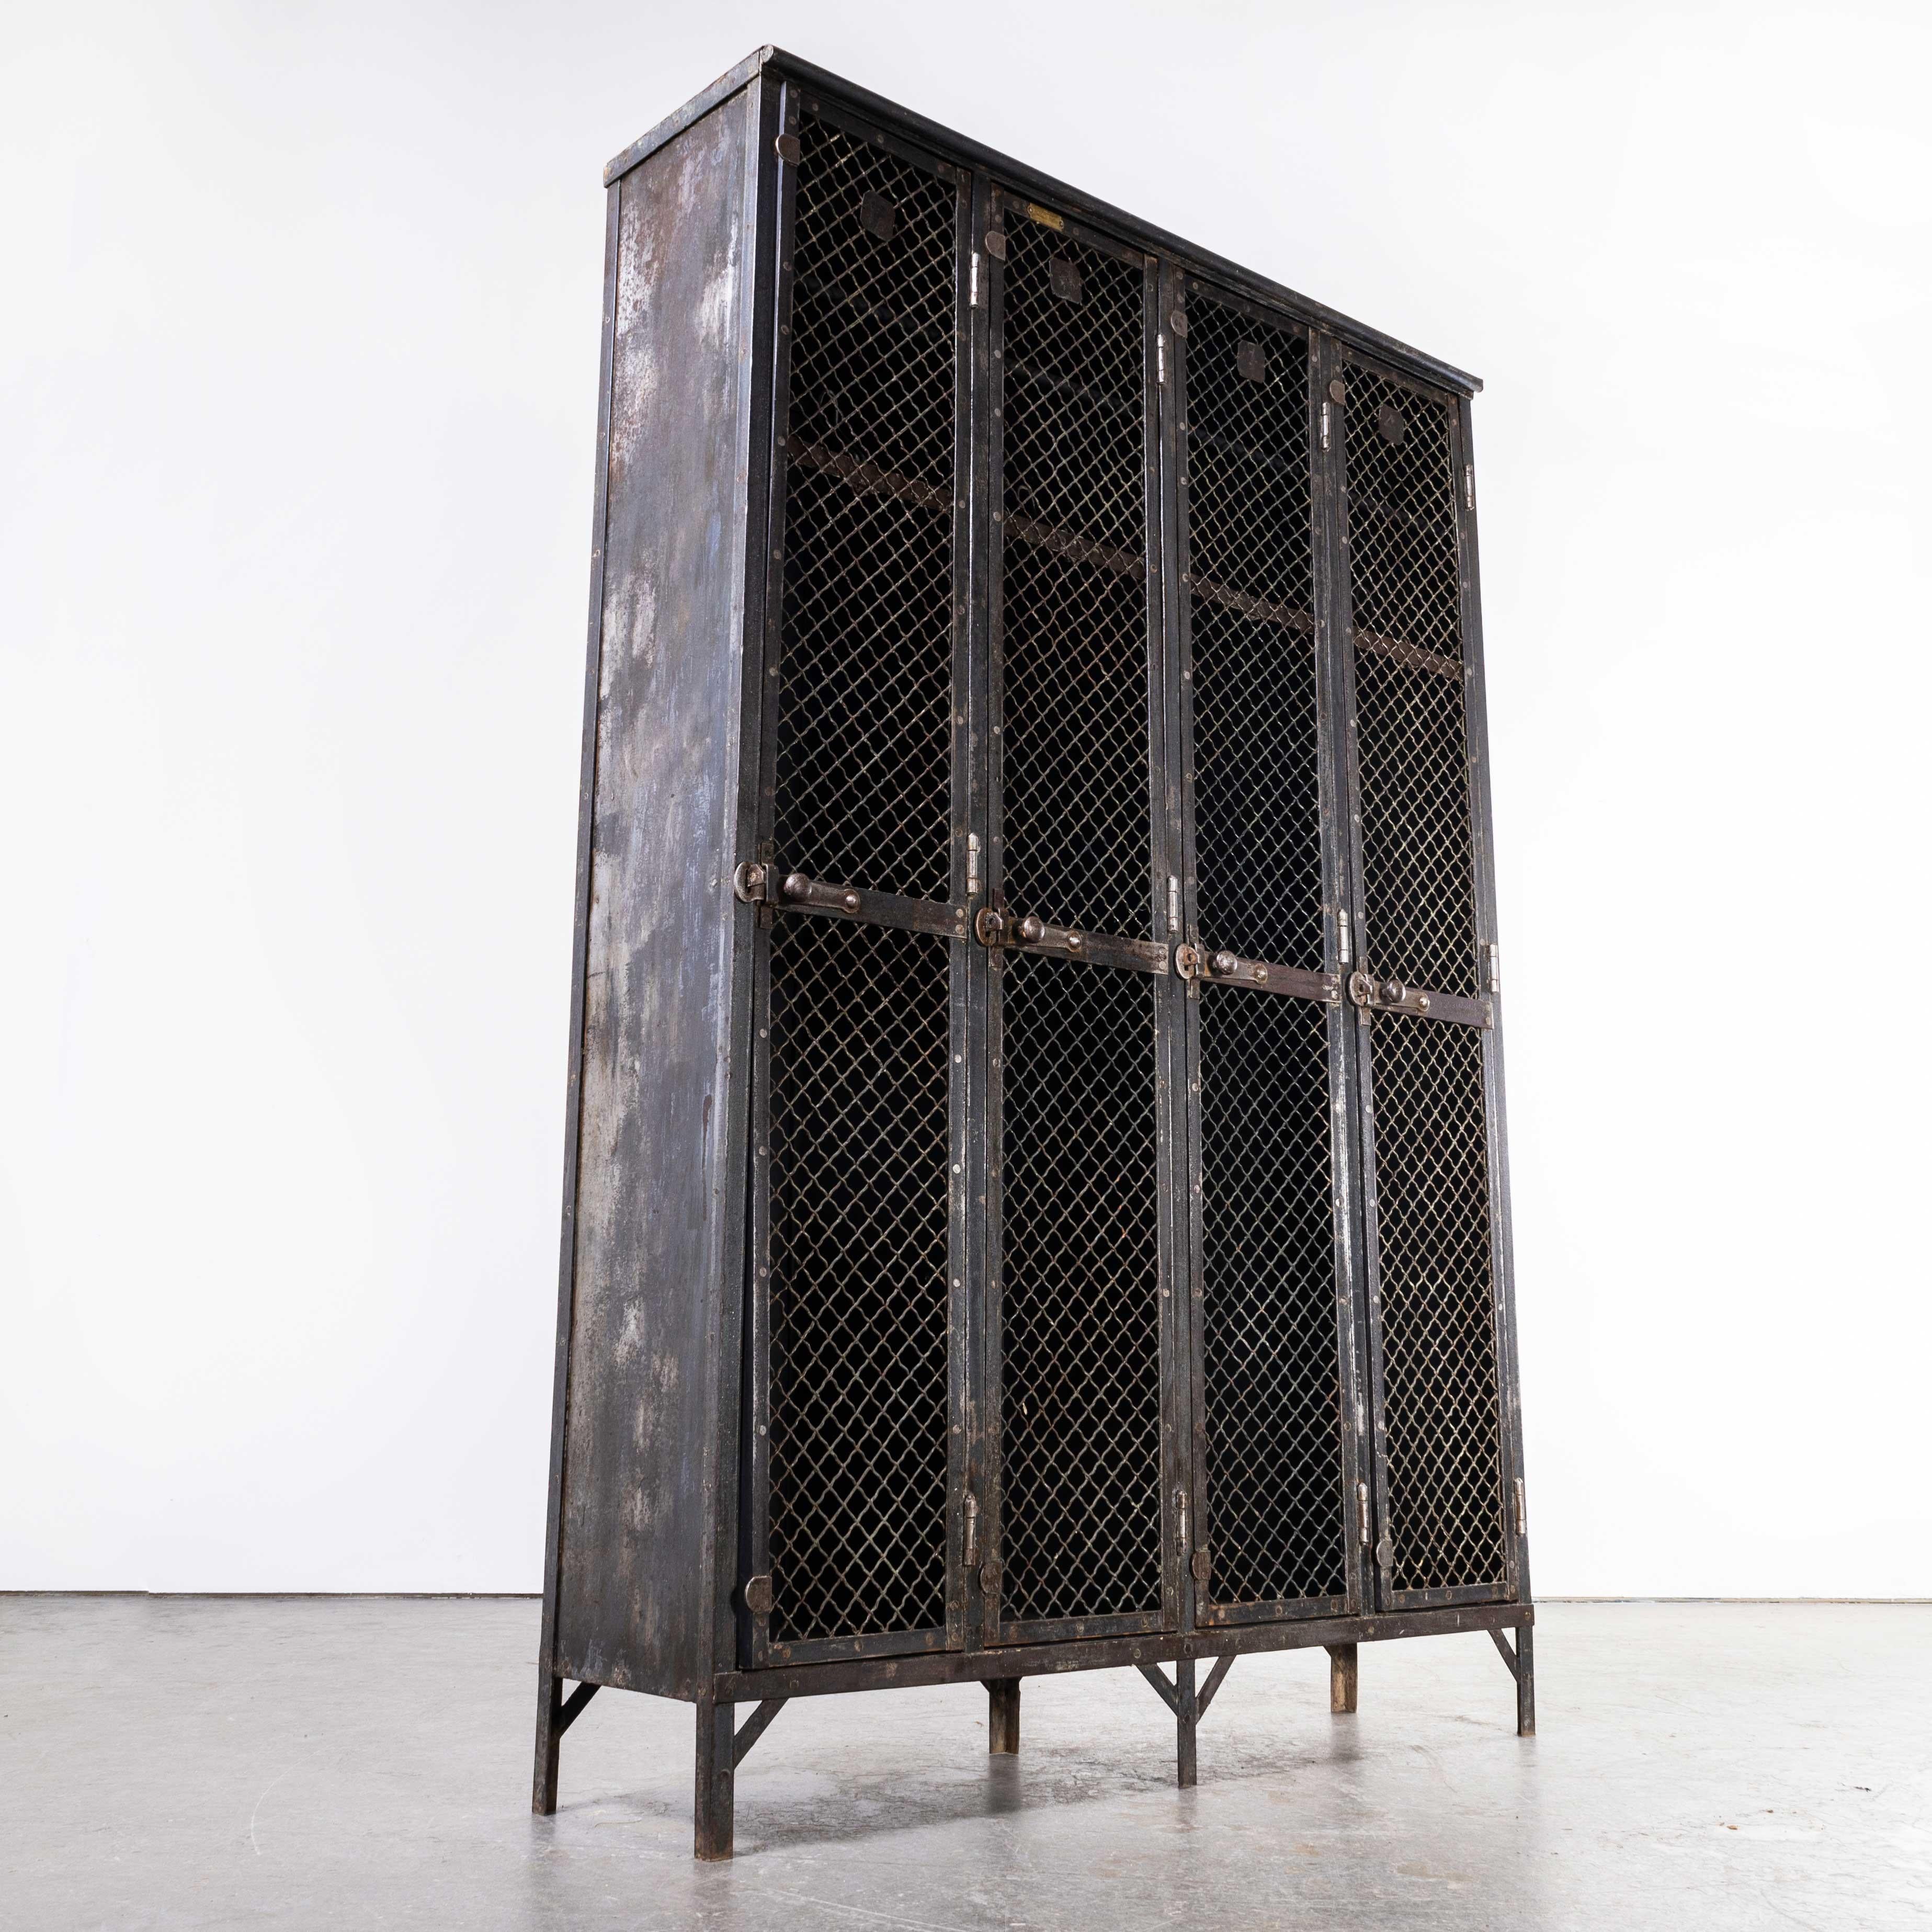 1930’s Original French metal four door mesh locker By Gantois (1198.1)
1930’s Original French metal four door mesh locker By Gantois. In the tradition of Forge des Strasbourg Gantois was one of a handful of major sheet metal producers operating out